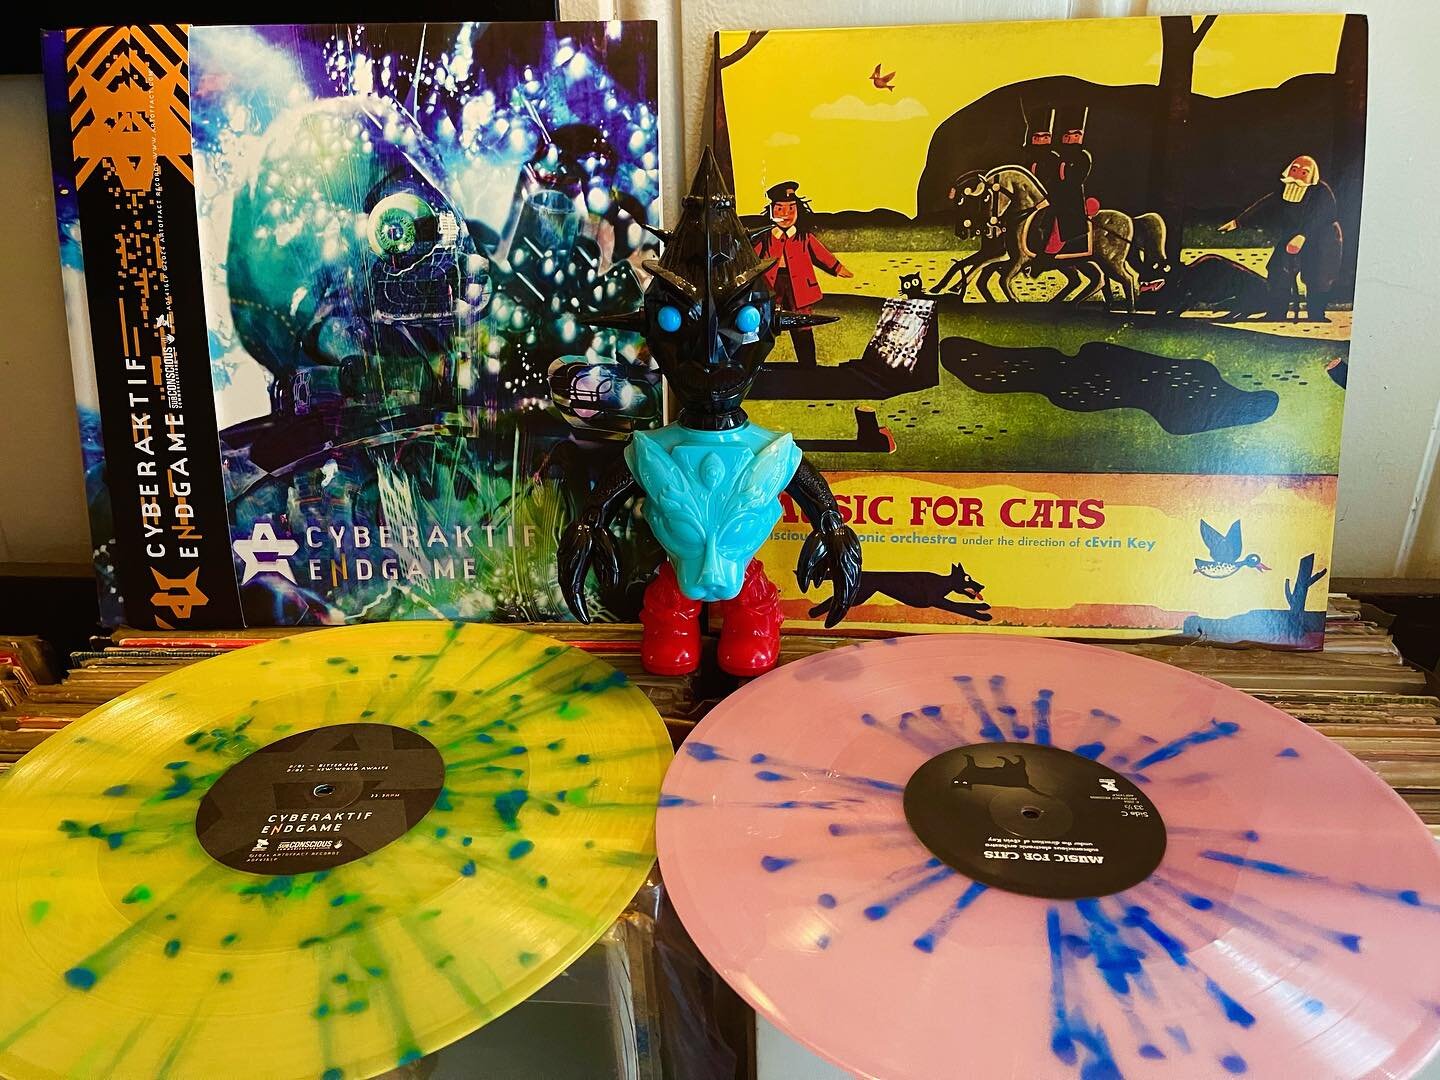 Double whammy today with new CYBERAKTIF eNdgame and MUSiC FOR CATS reissue both on Splatter vinyl  #cyberaktif  Artofact Records.  Limited edition